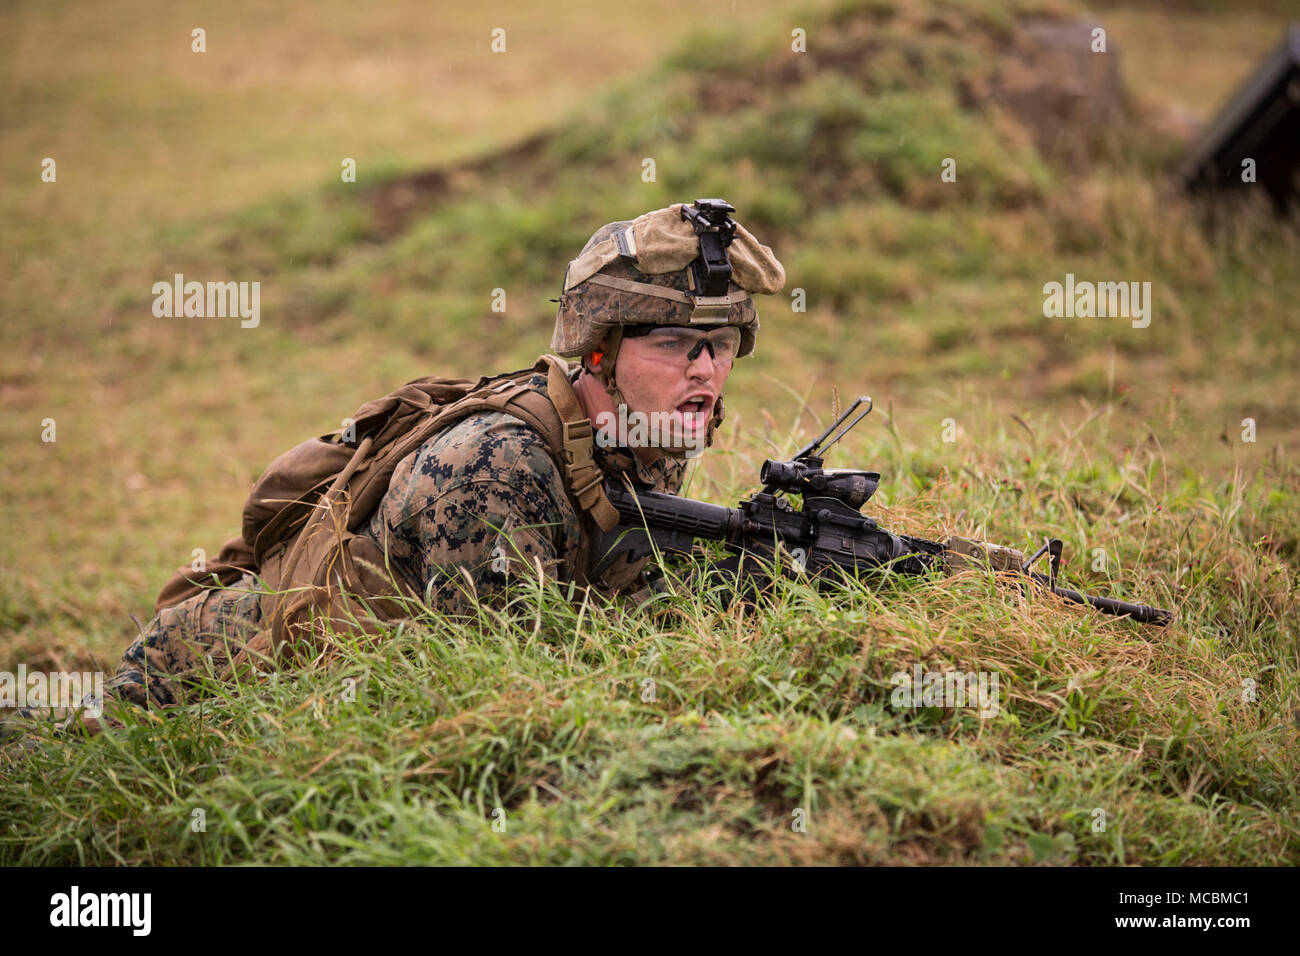 U.S. Marine Corps Lance Cpl. Beau Berg, a squad leader with Bravo Company (Bravo Co.), 1st Battalion, 3rd Marine Regiment, issues orders during a squad supported exercise at the Kaneohe Bay Range Training Facility, Marine Corps Base Hawaii, Mar. 22, 2018. Bravo Co. utilized machine gun suppression and mortar fire on simulated enemy forces, while infantrymen assaulted forward towards them. This combined-forces exercise was the last day of the battalion’s training event, Exercise Bougainville One, an annual training exercise that strengthens pre-deployment readiness. Stock Photo